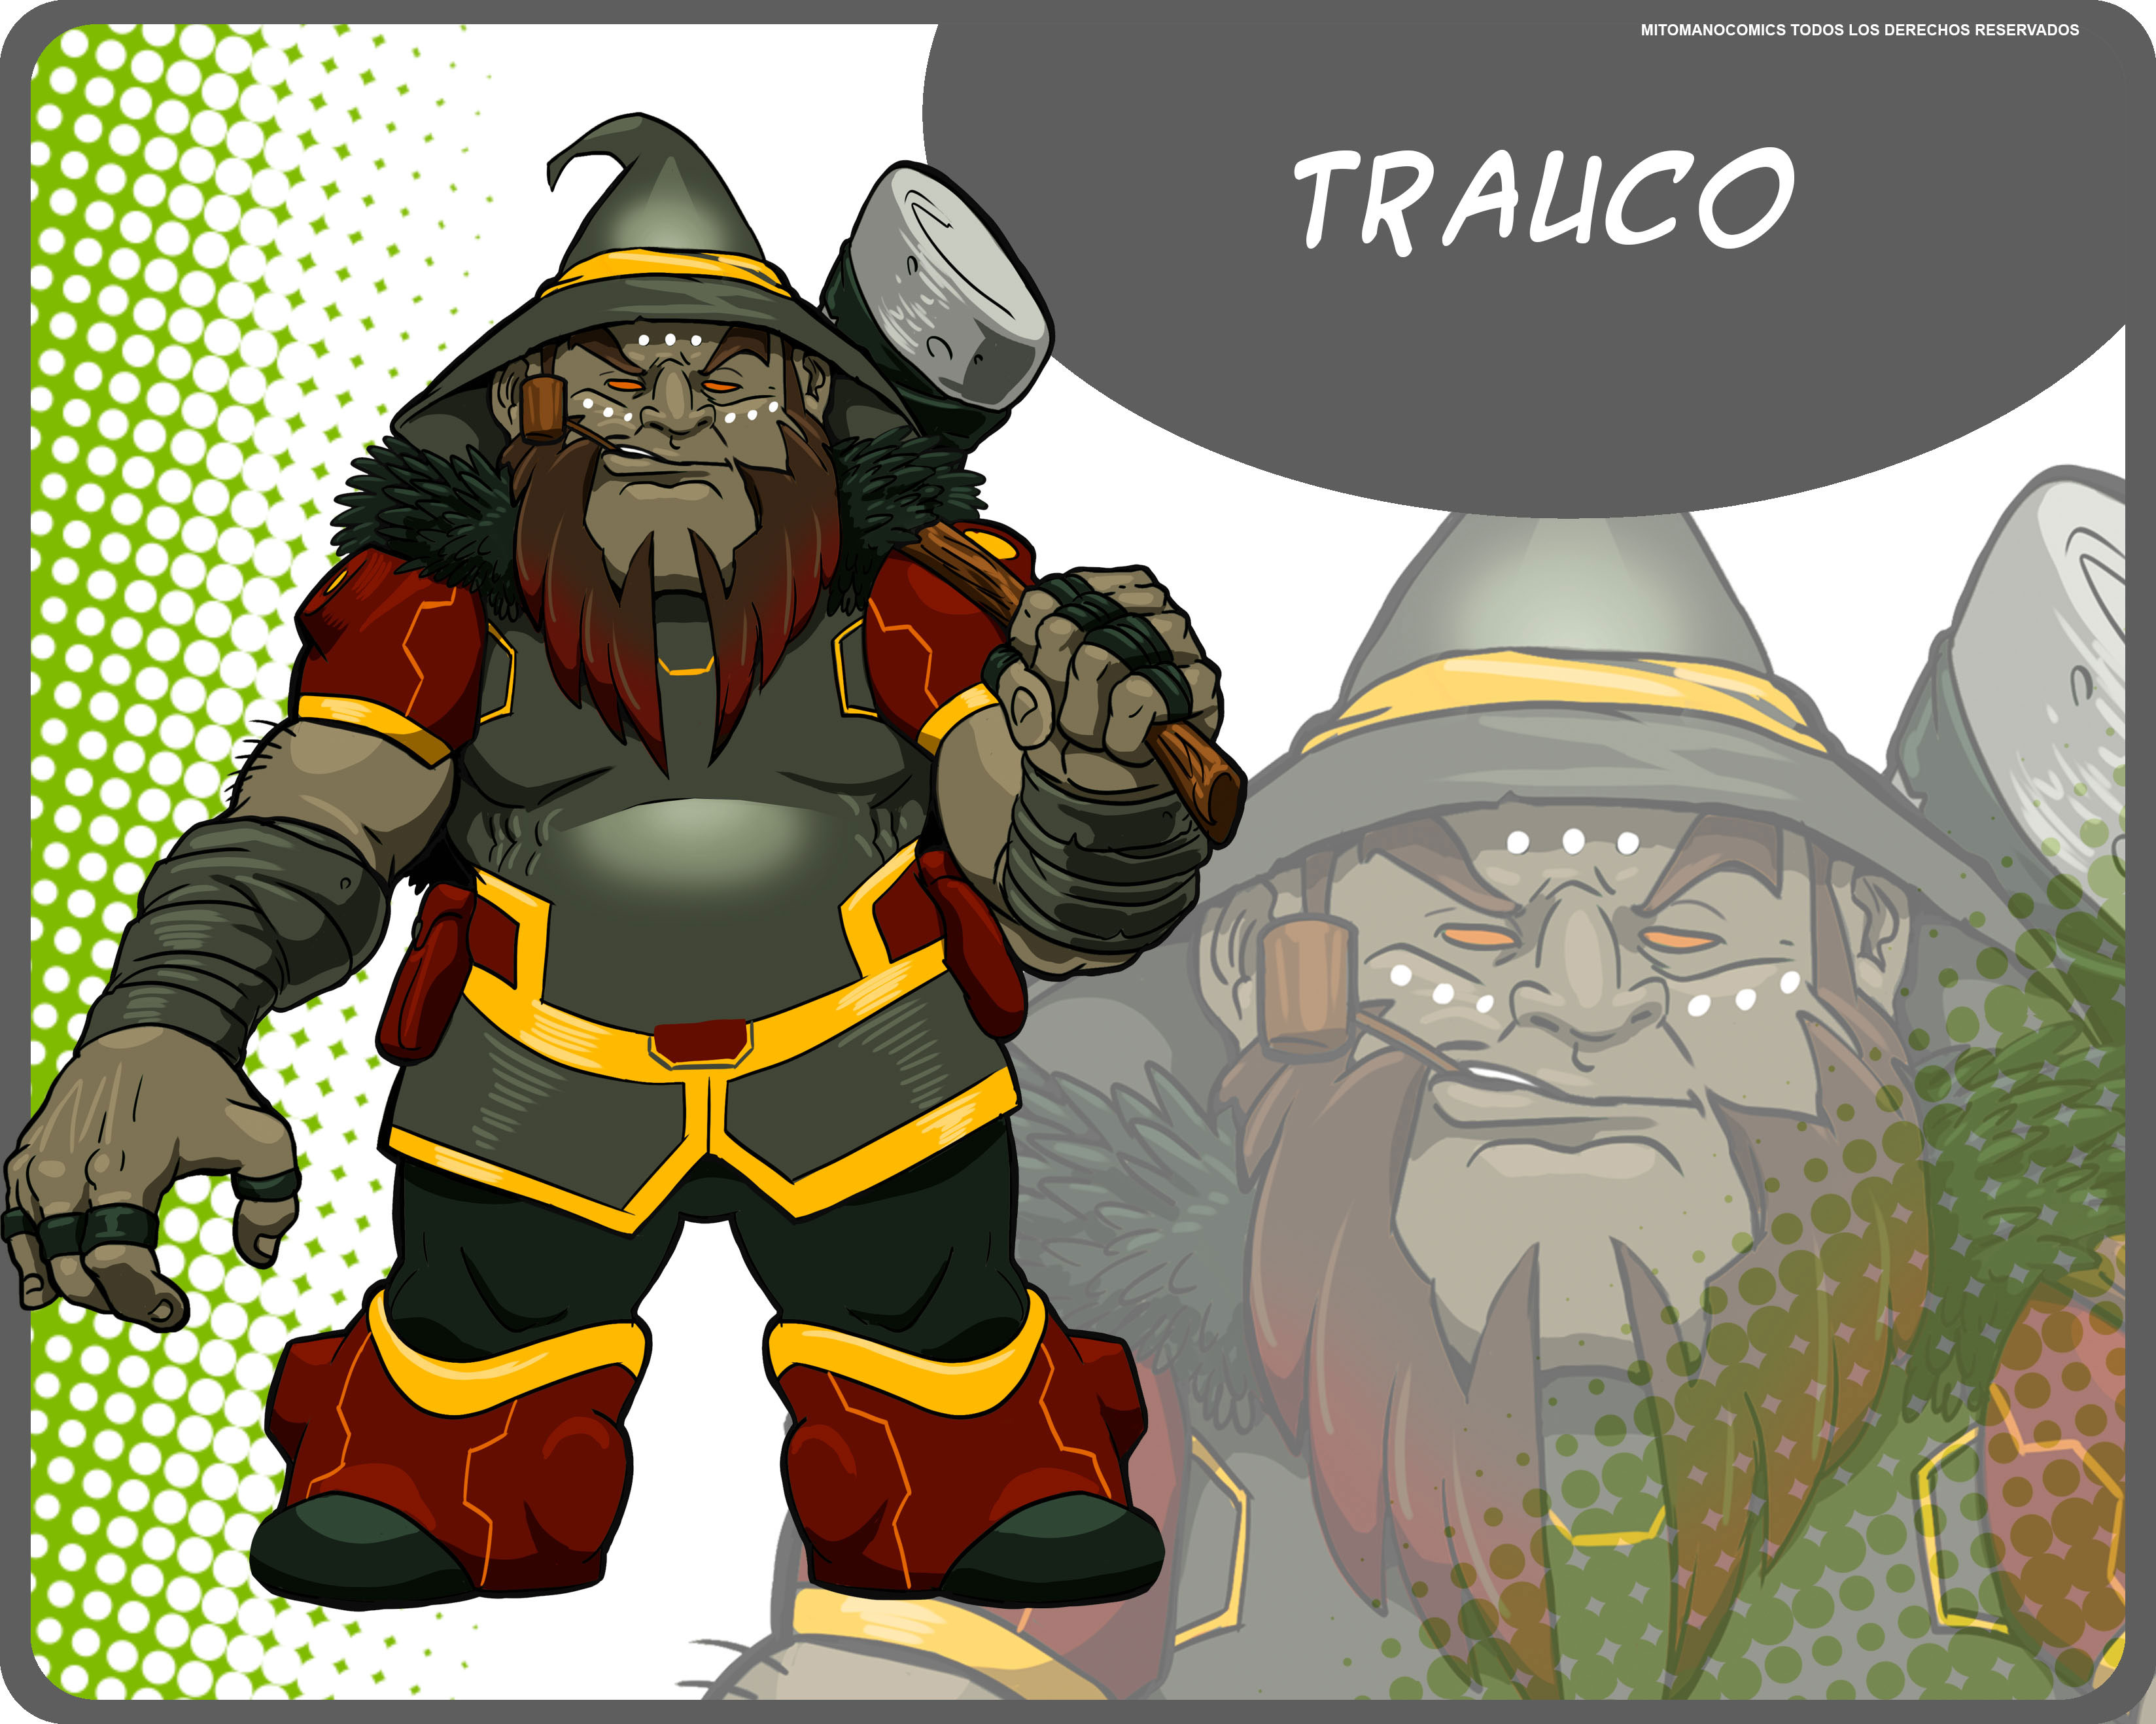 Trauco